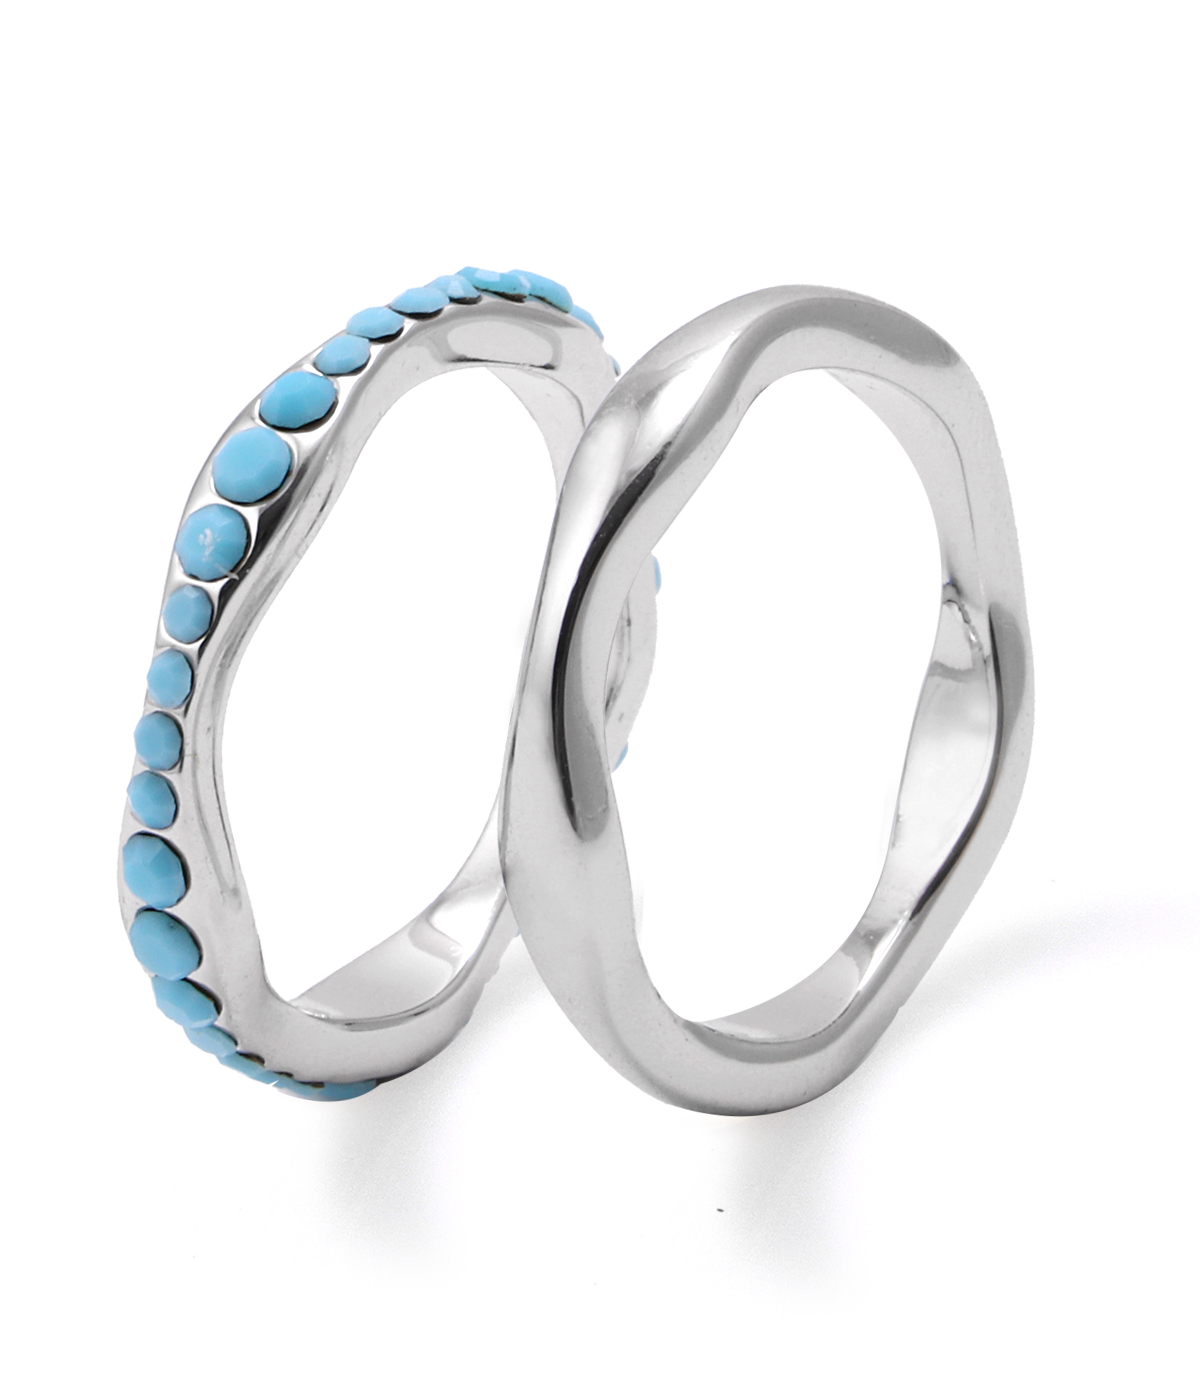 FLOW ring - turquoise -latest RING,Band Ring design 2021